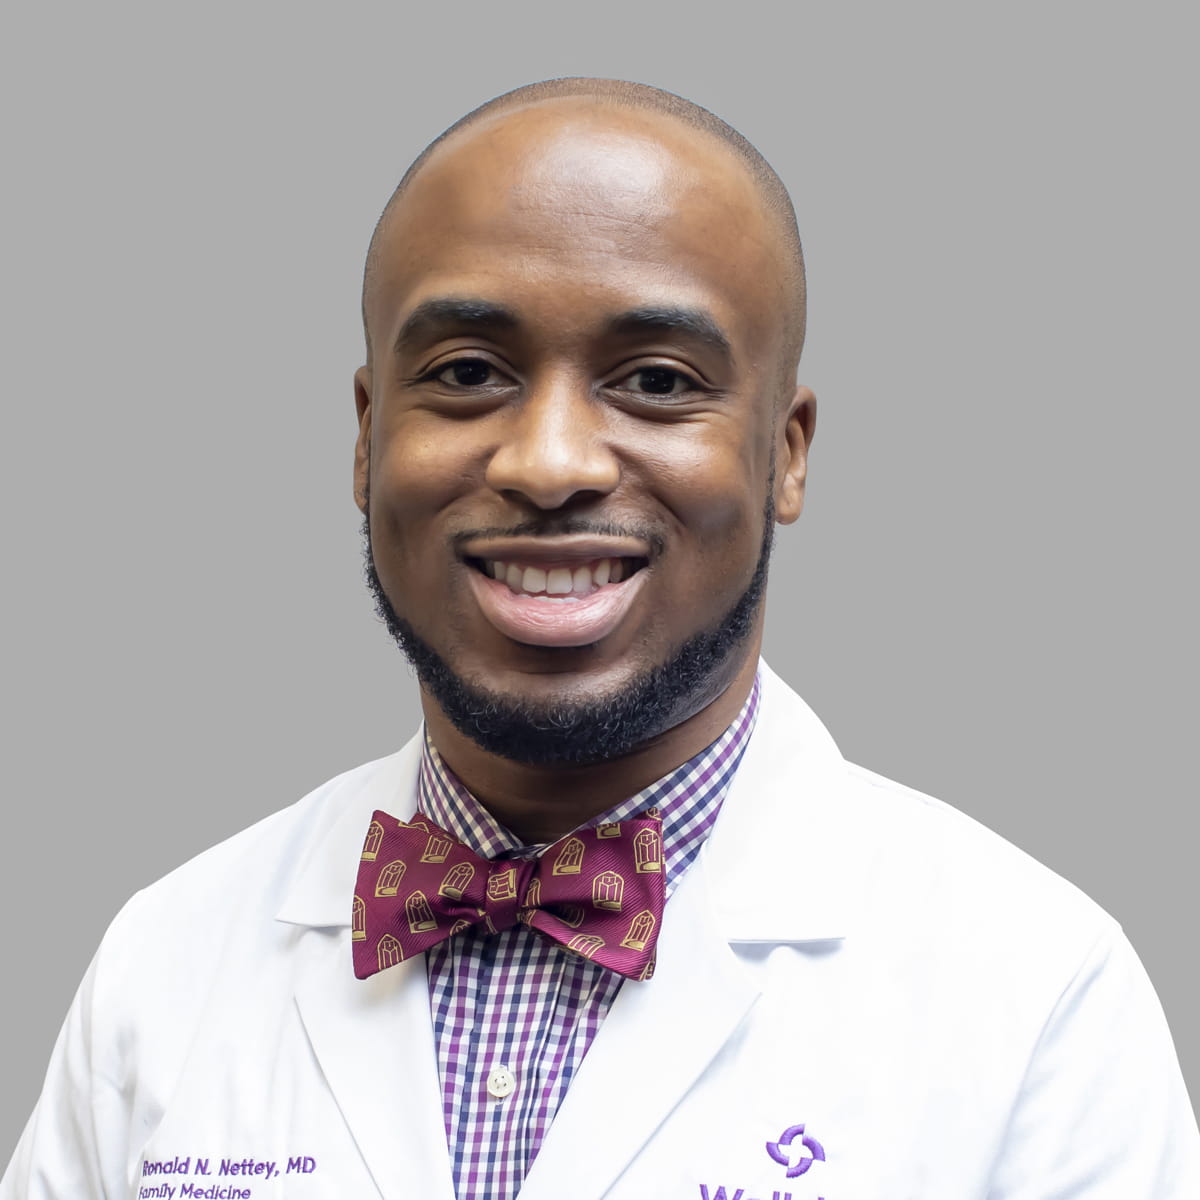 A friendly image of Ronald Nettey, MD